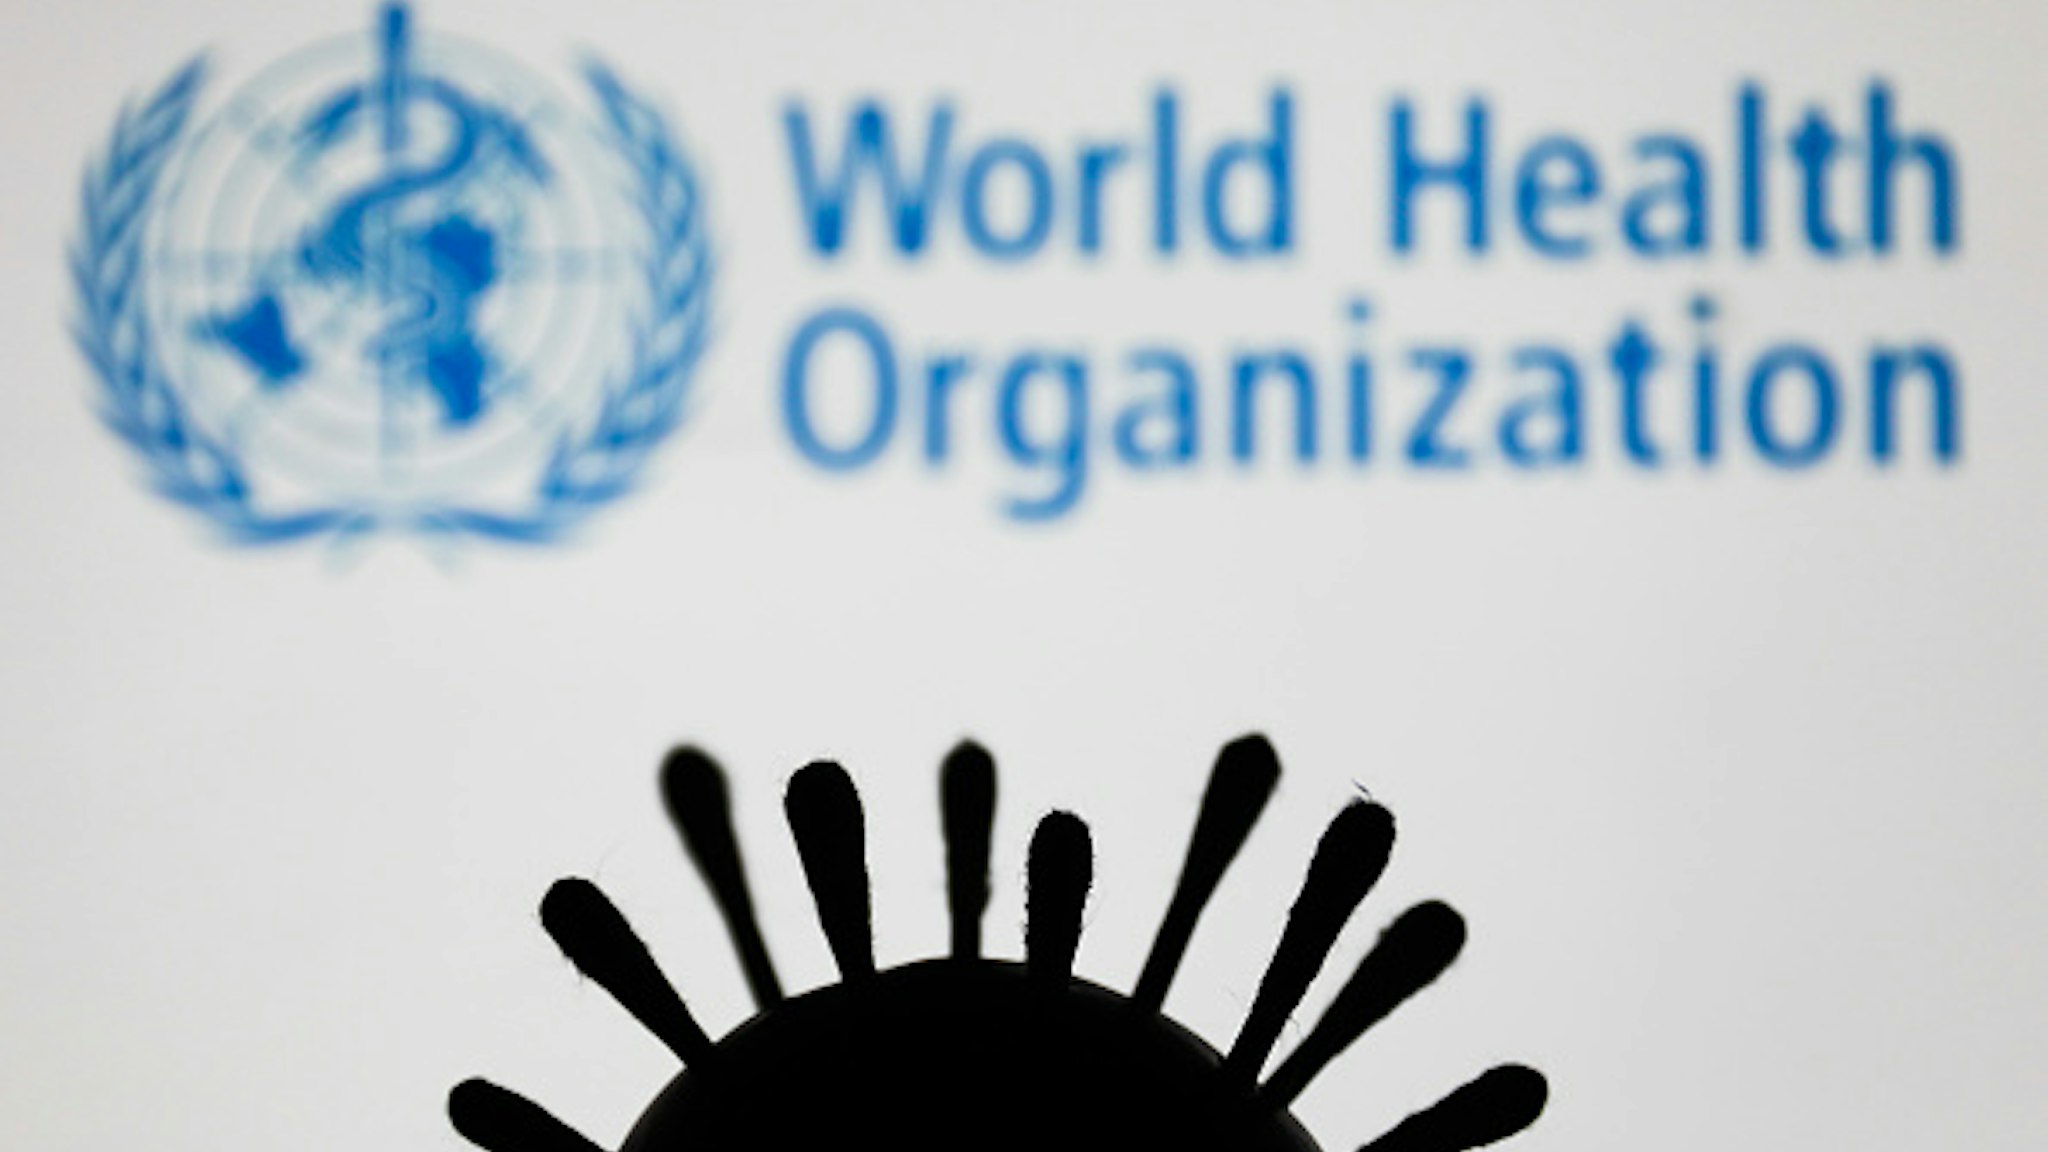 Coronavirus model is seen with World Health Organization ( WHO ) logo in the background in this illustration photo taken in Poland on June 5, 2020.